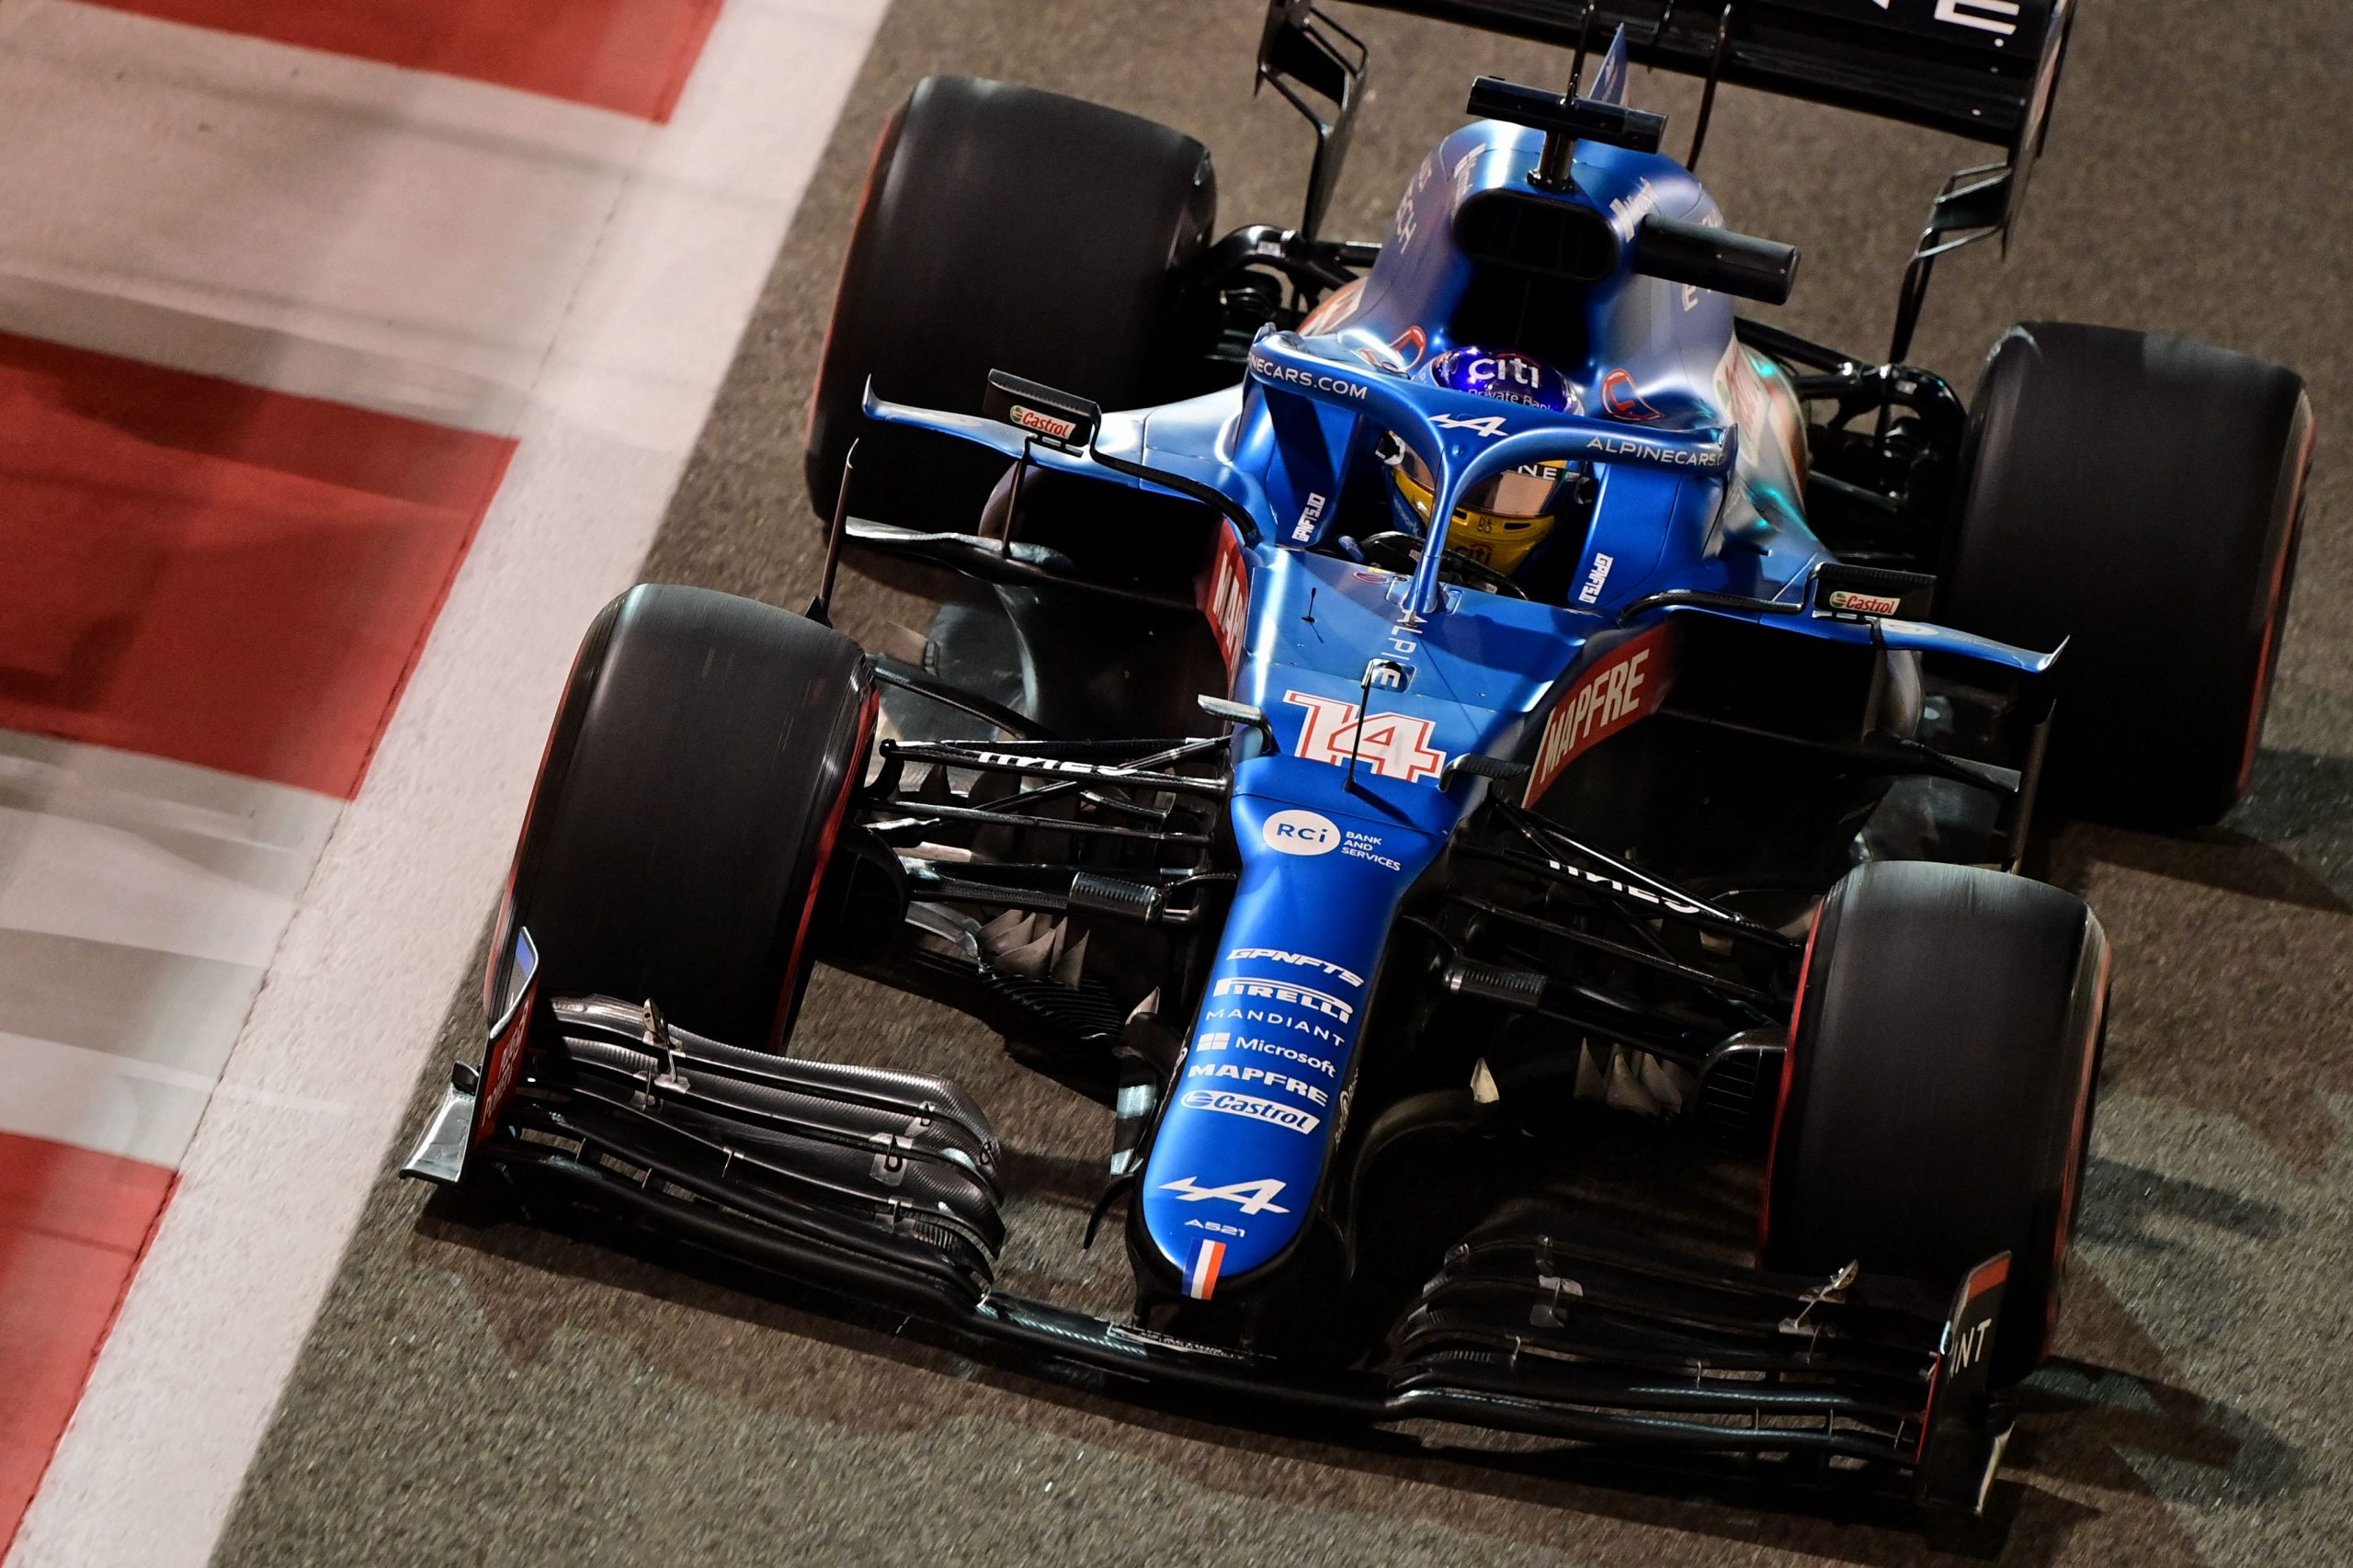 Fernando Alonso Absolutely Sending It is a Thing of Beauty as Formula 1 Hits The Track Ahead of the Abu Dhabi Grand Prix